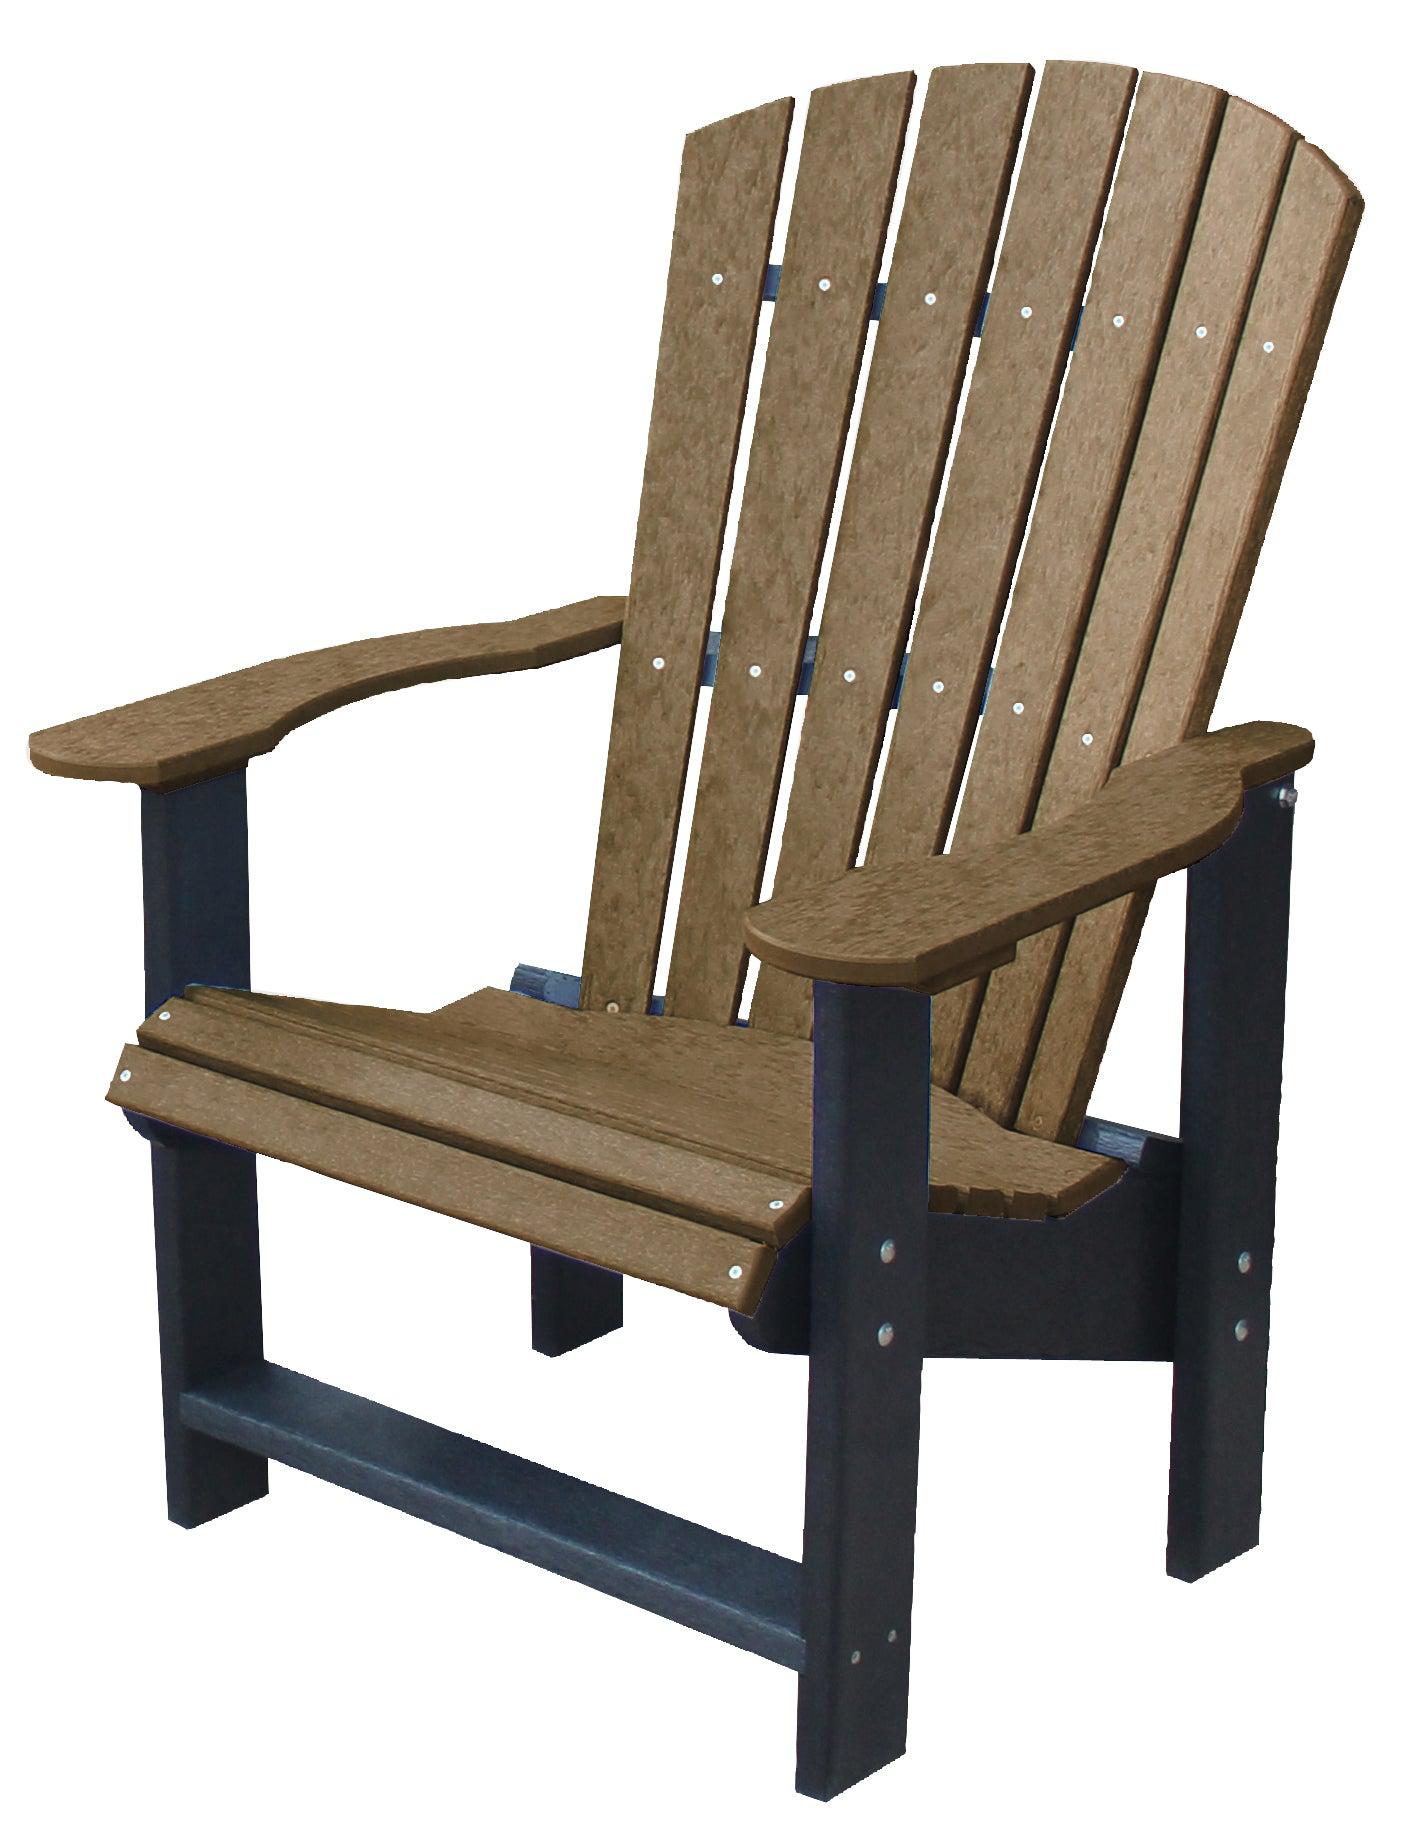 Wildridge LCC-112 Recycled Plastic Heritage Upright Adirondack Chair (QUICK SHIP) - LEAD TIME TO SHIP 3 TO 4 BUSINESS DAYS